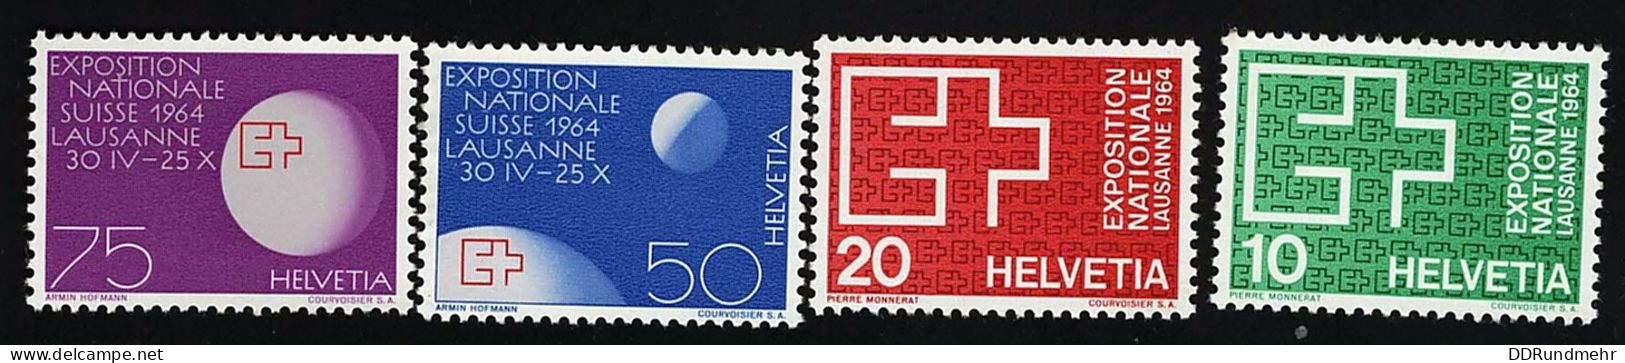 1963 Expo Lausanne  Michel CH 782 - 785 Stamp Number CH 430 - 433 Yvert Et Tellier CH 717 - 720 Xx MNH - Nuevos